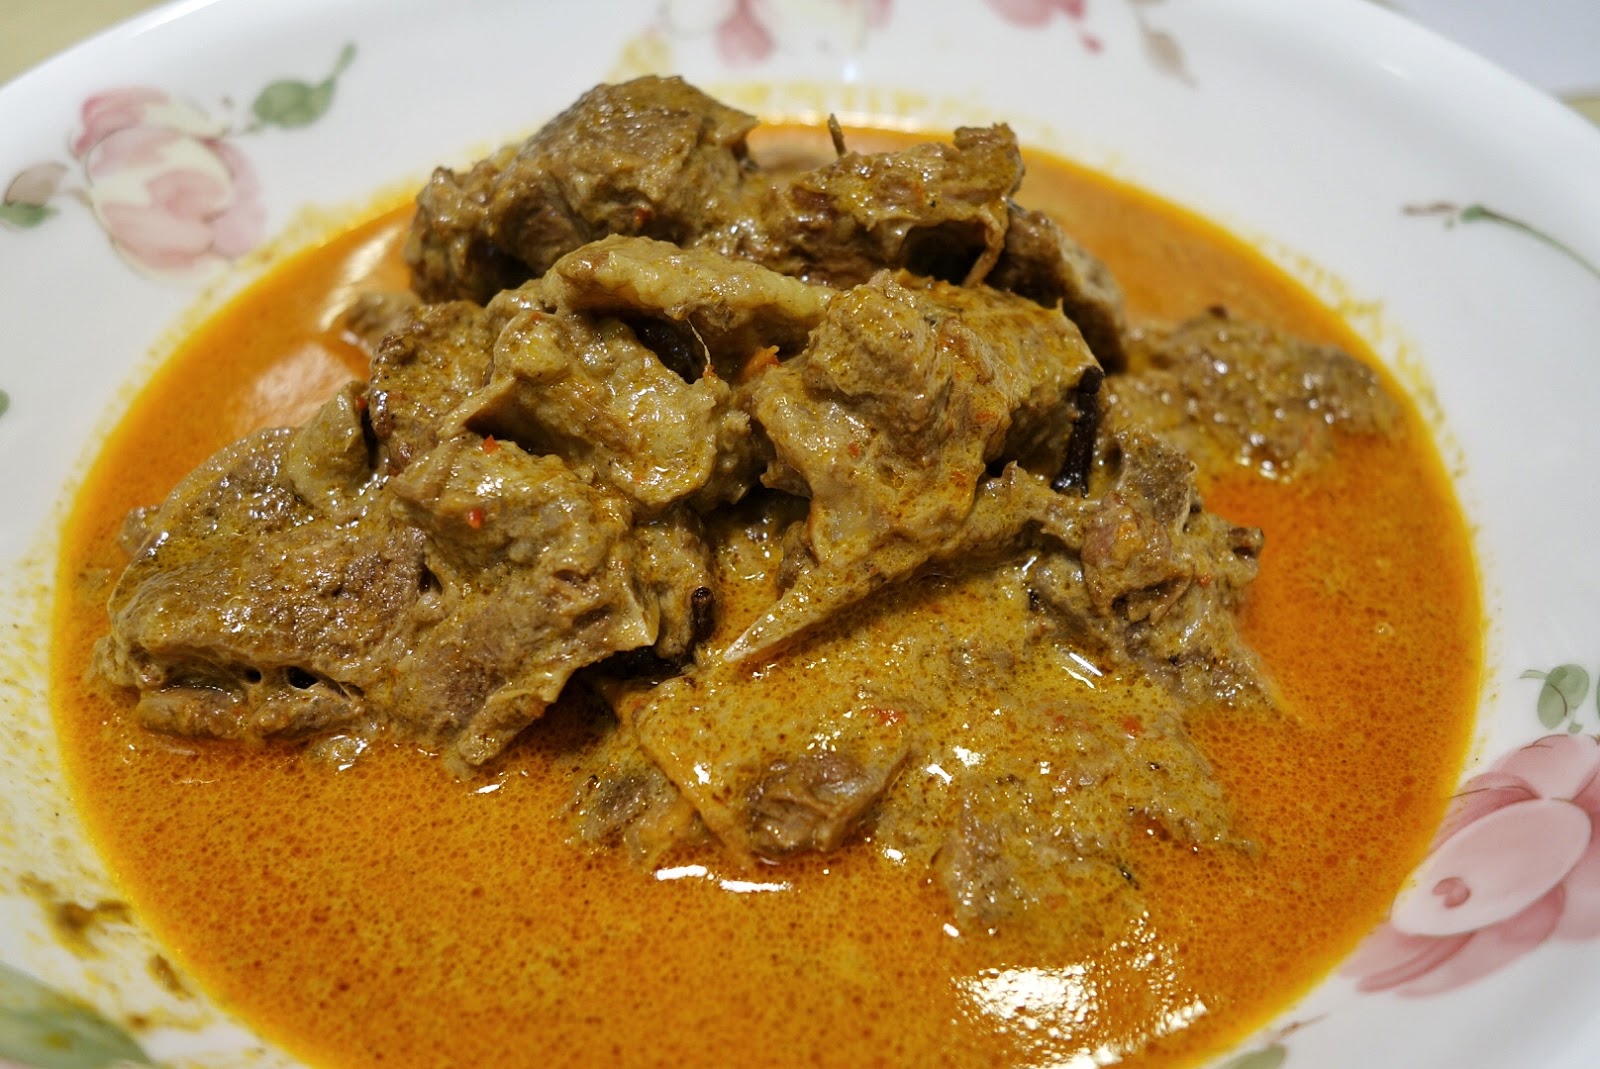 Gulai Kambing Mutton Curry My Mother In Law S Recipe So You Know It S Gonna Be Good